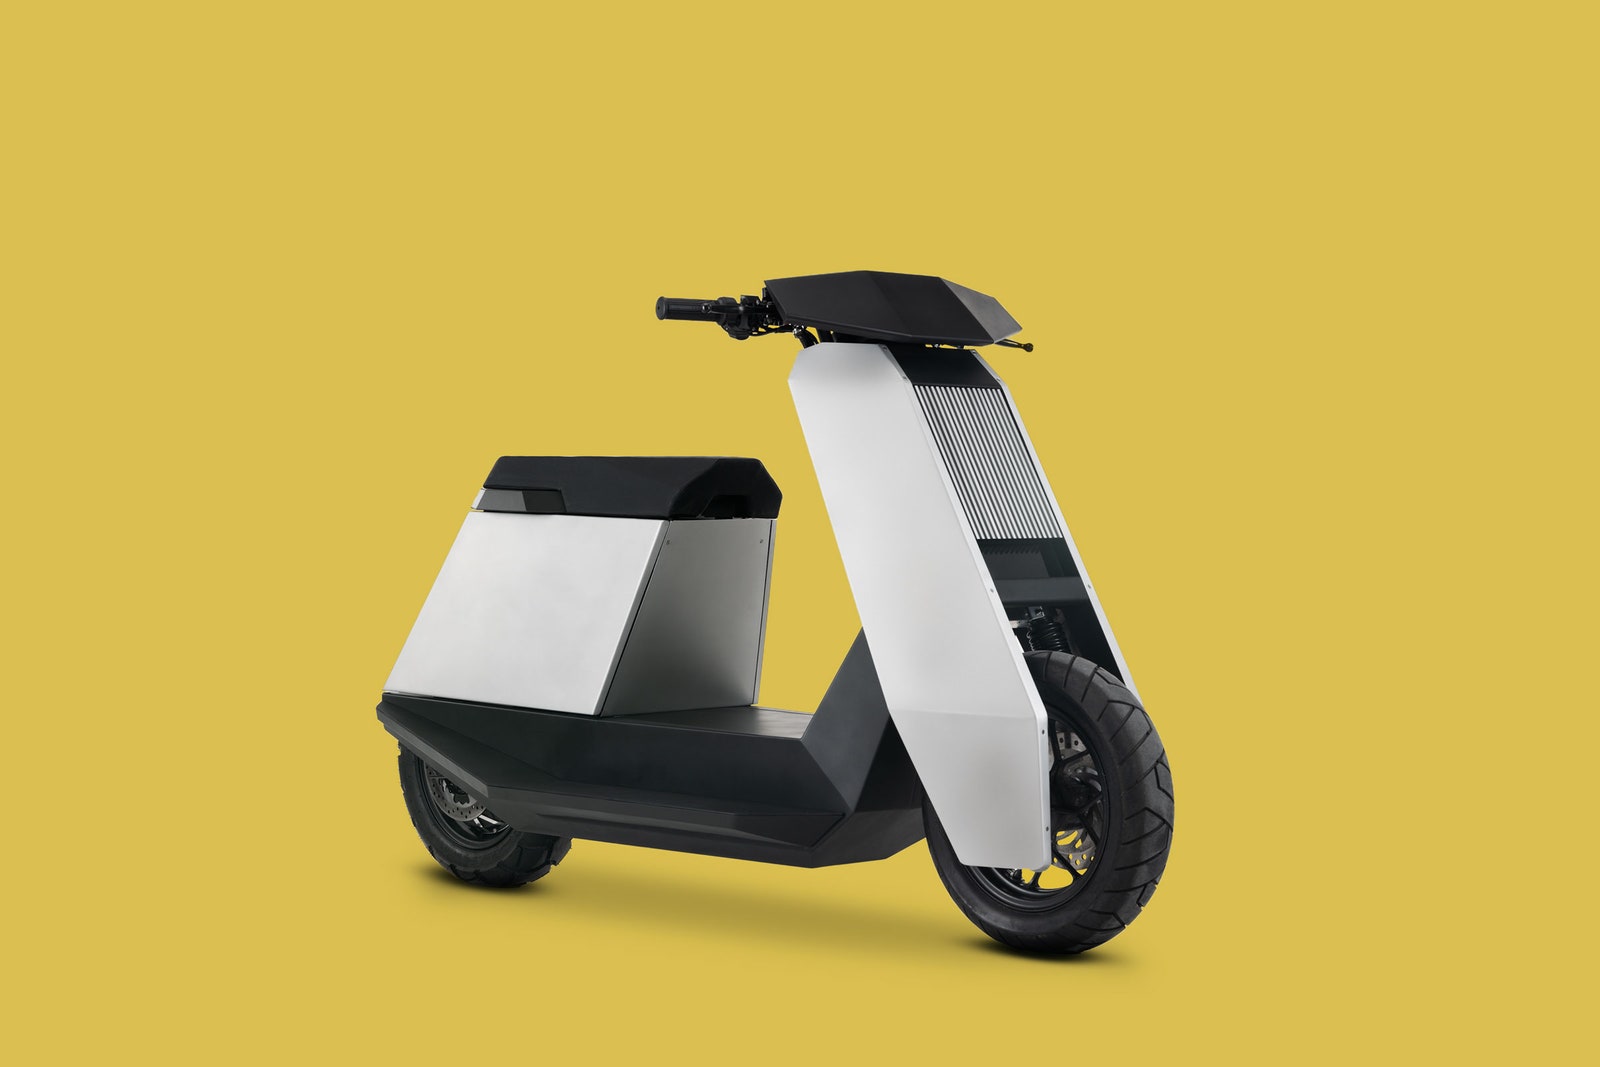 Infinite Machine’s P1 Electric Scooter Looks Like Judge Dredd’s Lawmaster